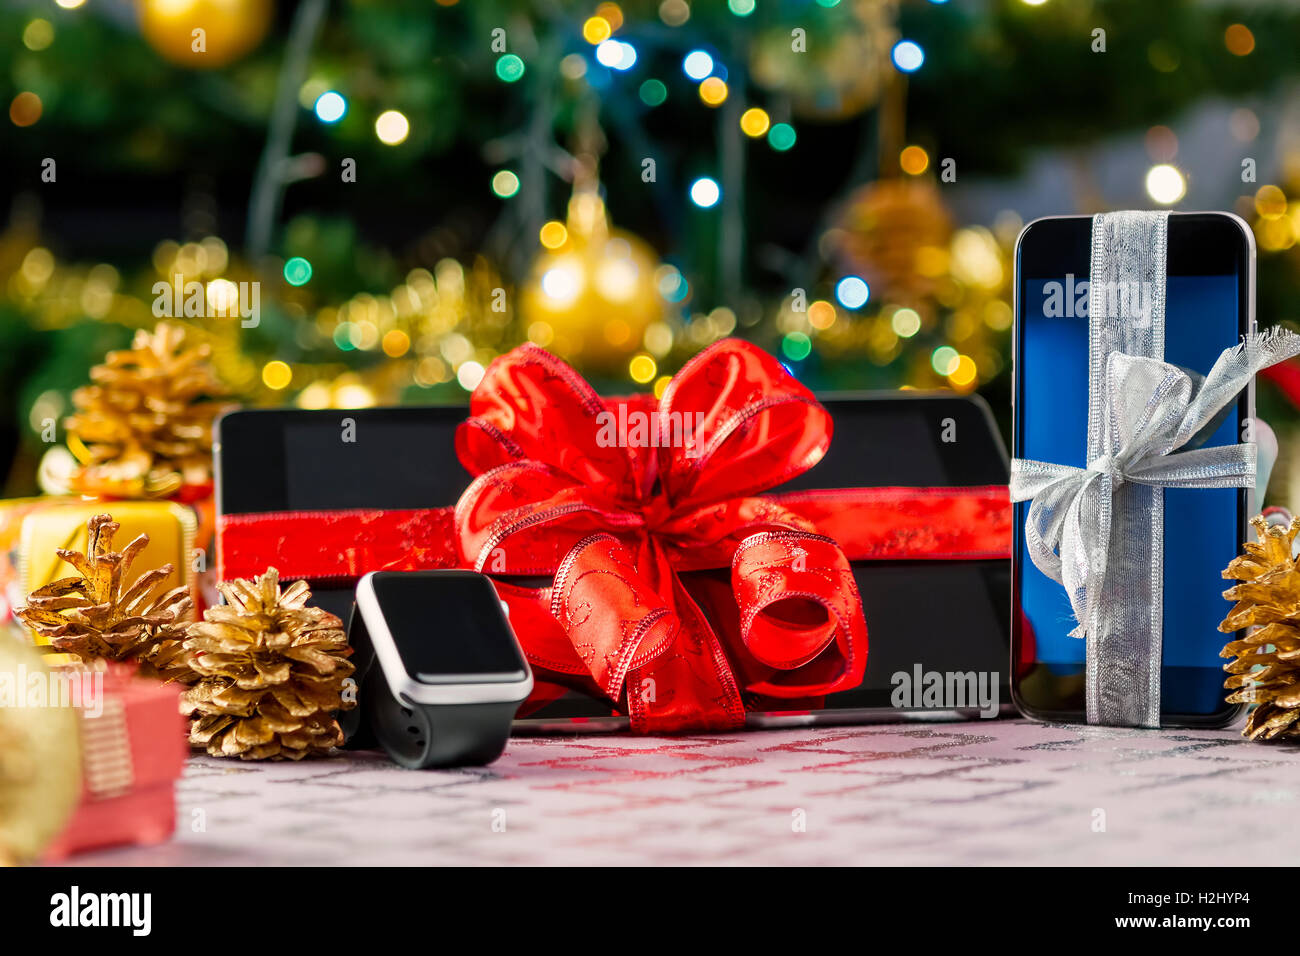 Tablet pc, smartphone and smartwatch with gifts and decorations in front of Christmas tree. Focus on smartphone. Stock Photo